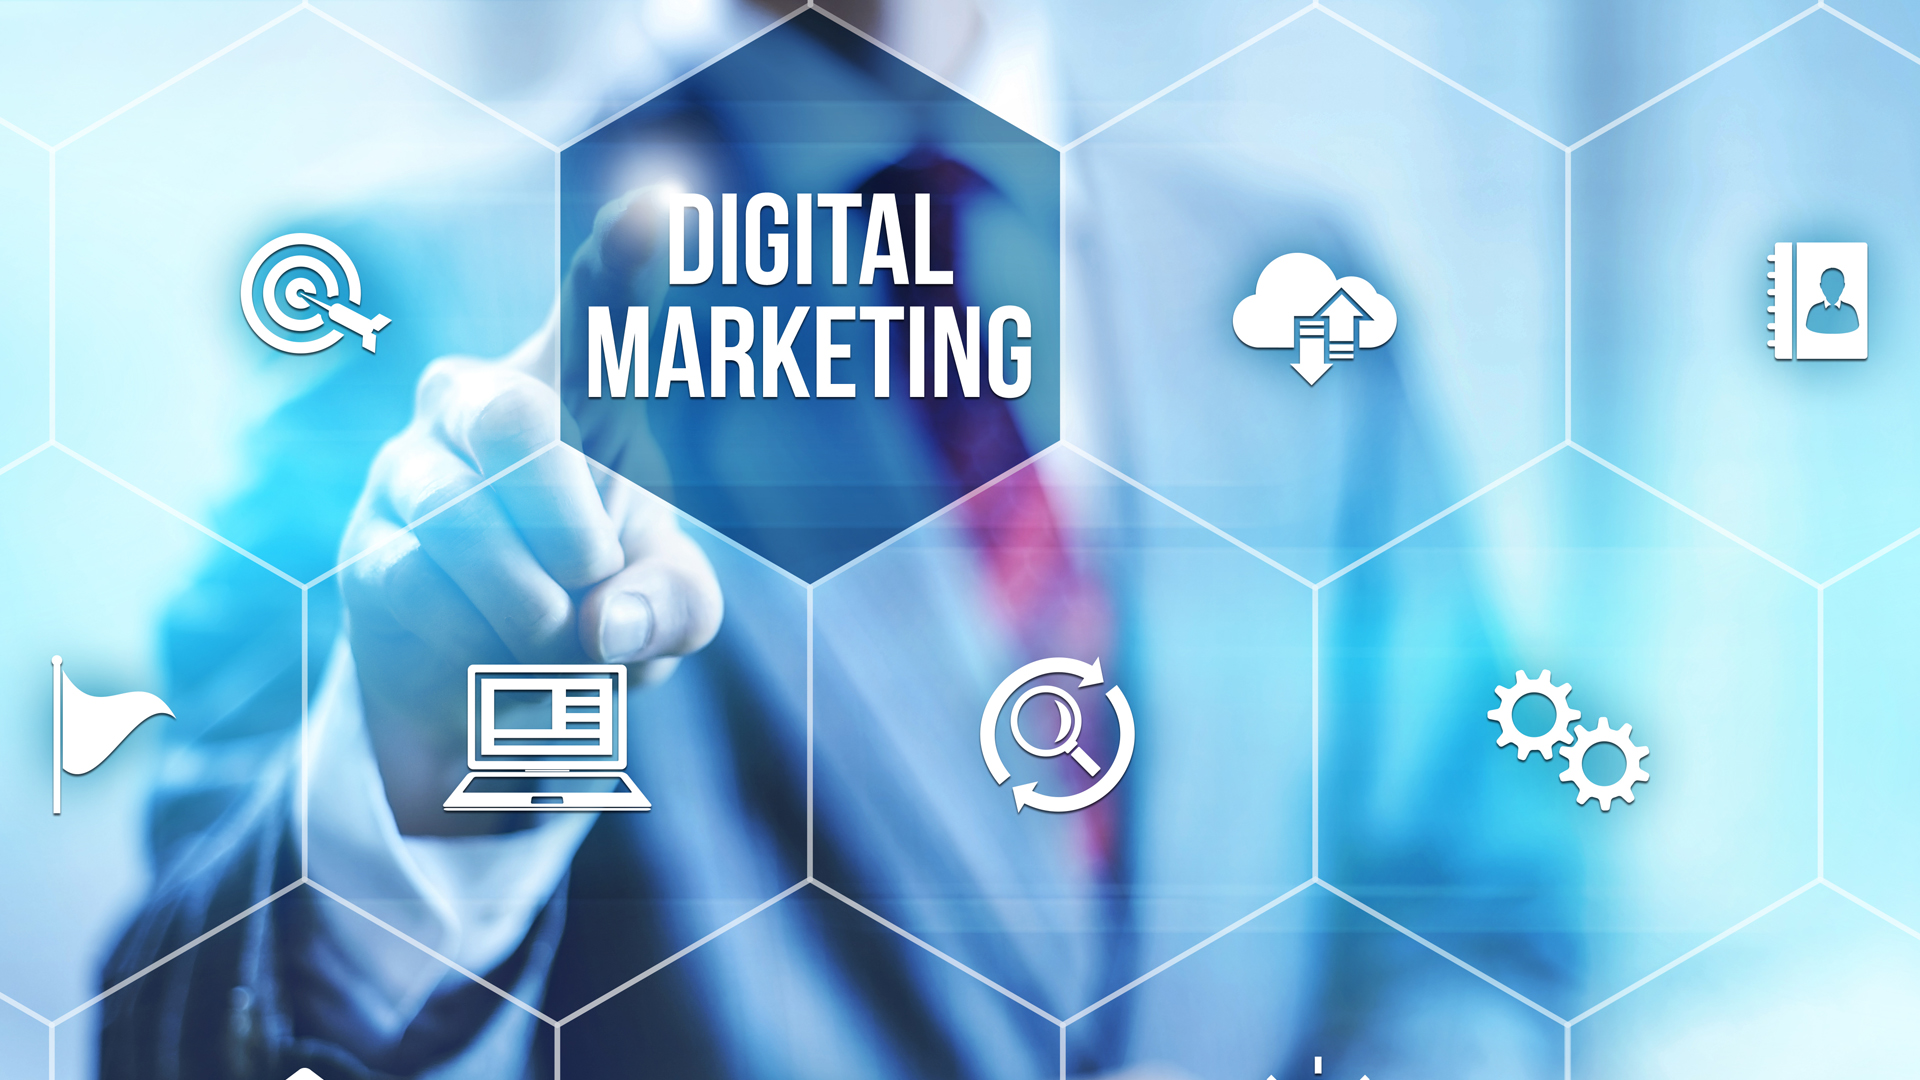 How to Choose the Right Service Provider for Your Digital Marketing Needs